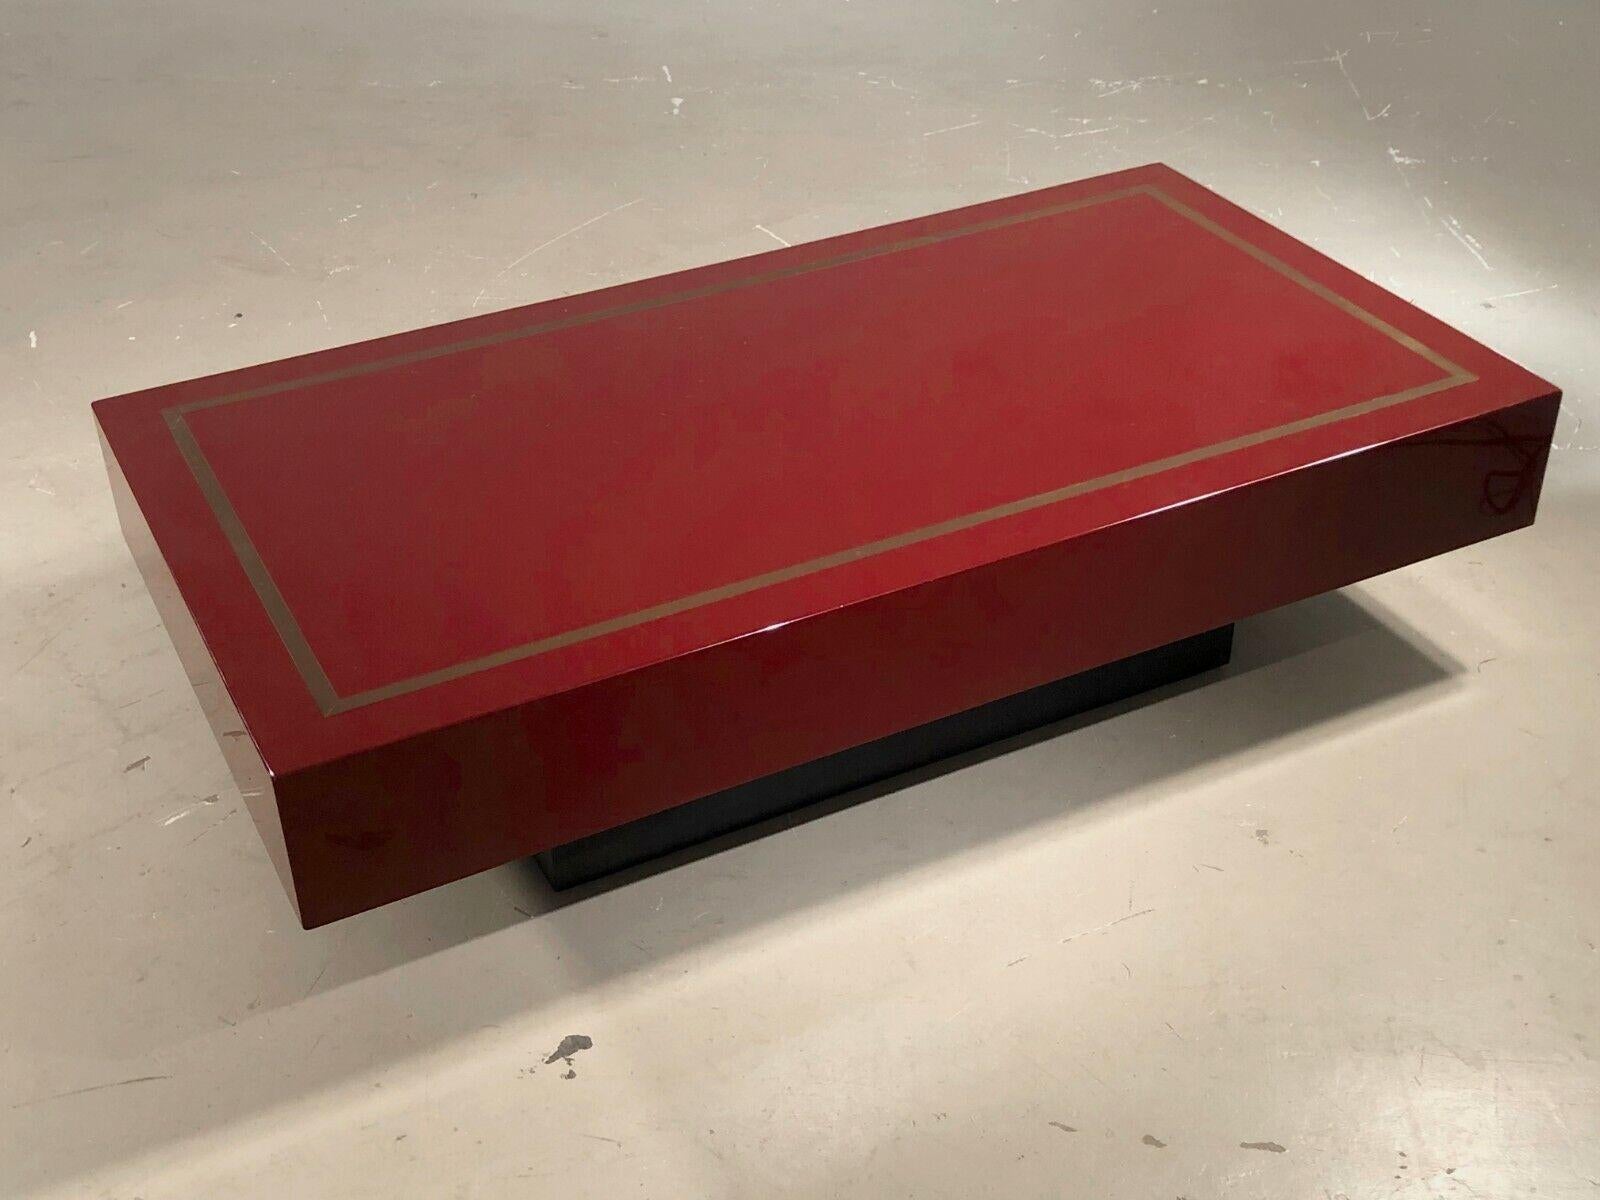 French A NEOCLASSICAL SHABBY-CHIC Lacquer COFFEE TABLE by JEAN-CLAUDE MAHEY France 1970 For Sale